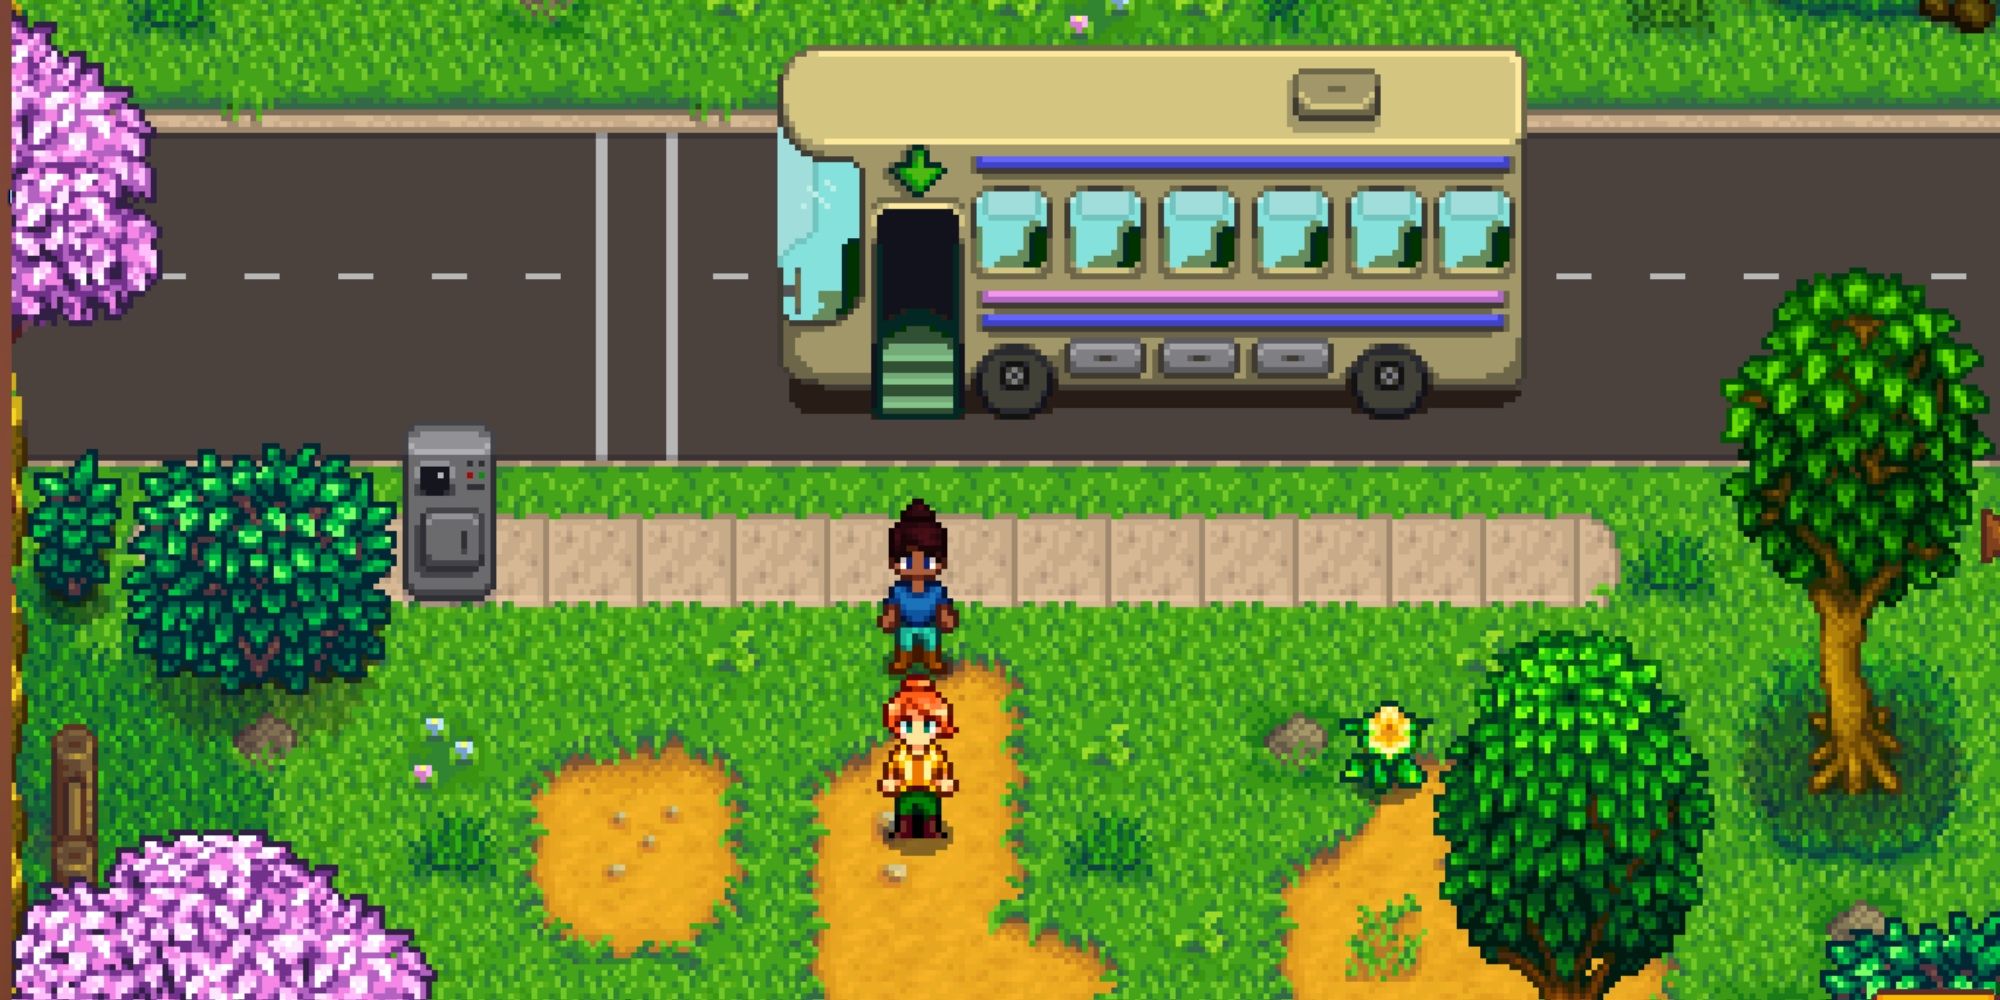 Robin leading the player character away from the bus as they arrive